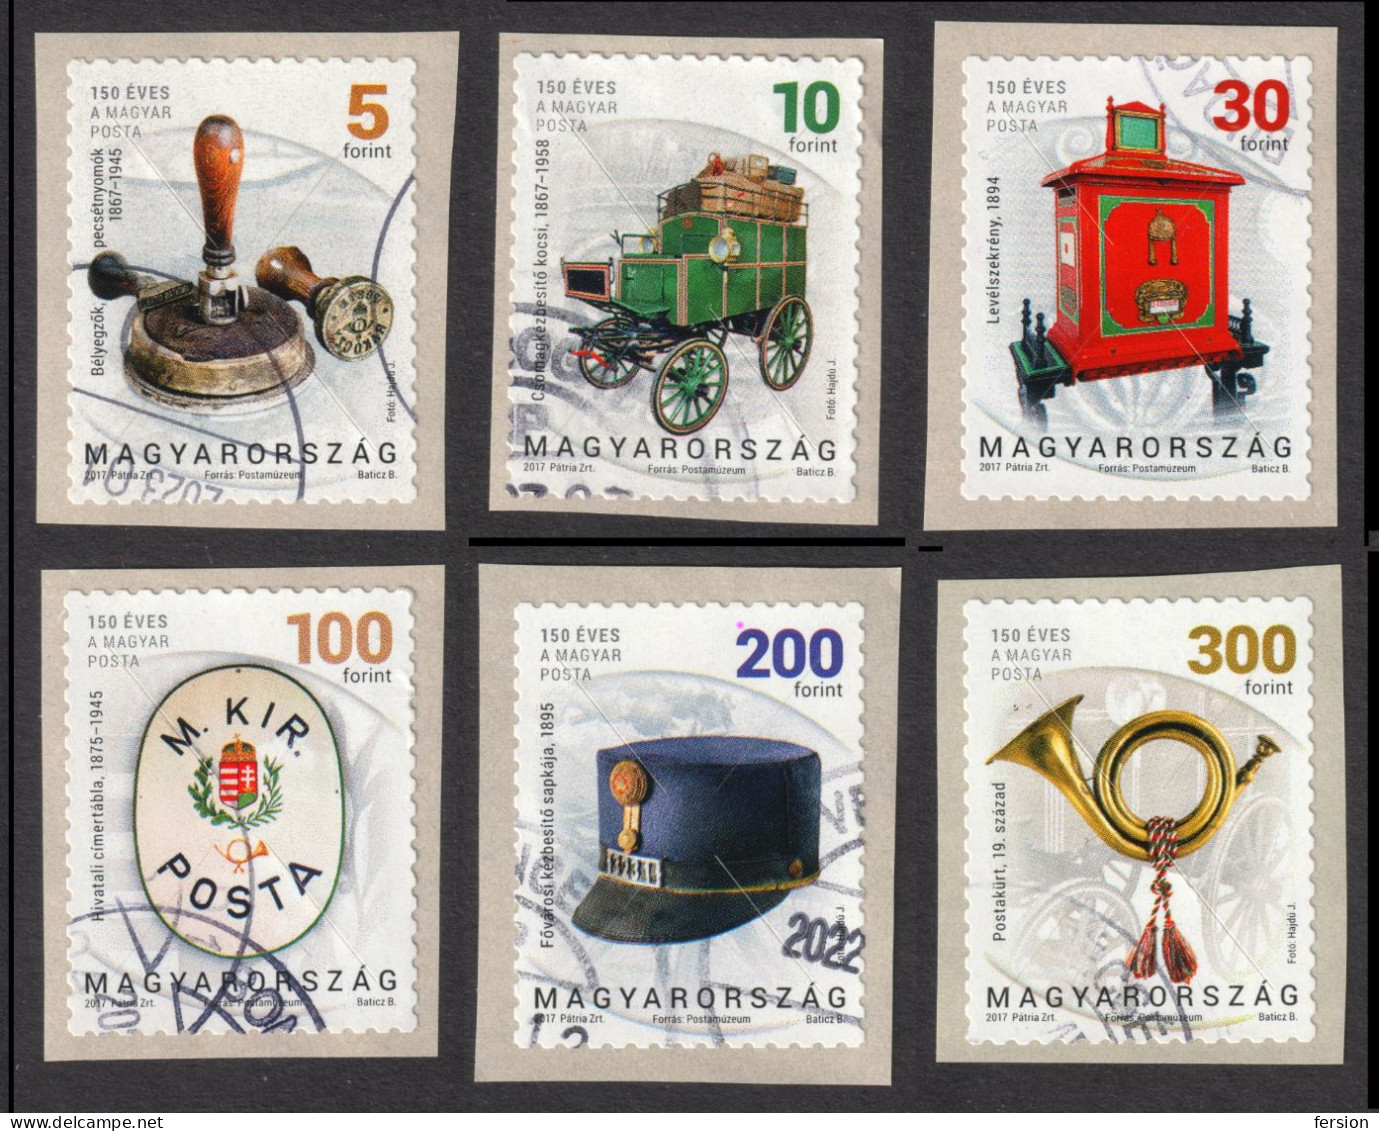 HUNGARY 2017 150th Anniv POST Postal Service SELF ADHESIVE LABEL VIGNETTE / Mail Stage Coach Horn Mailbox Hat - Used - Usati